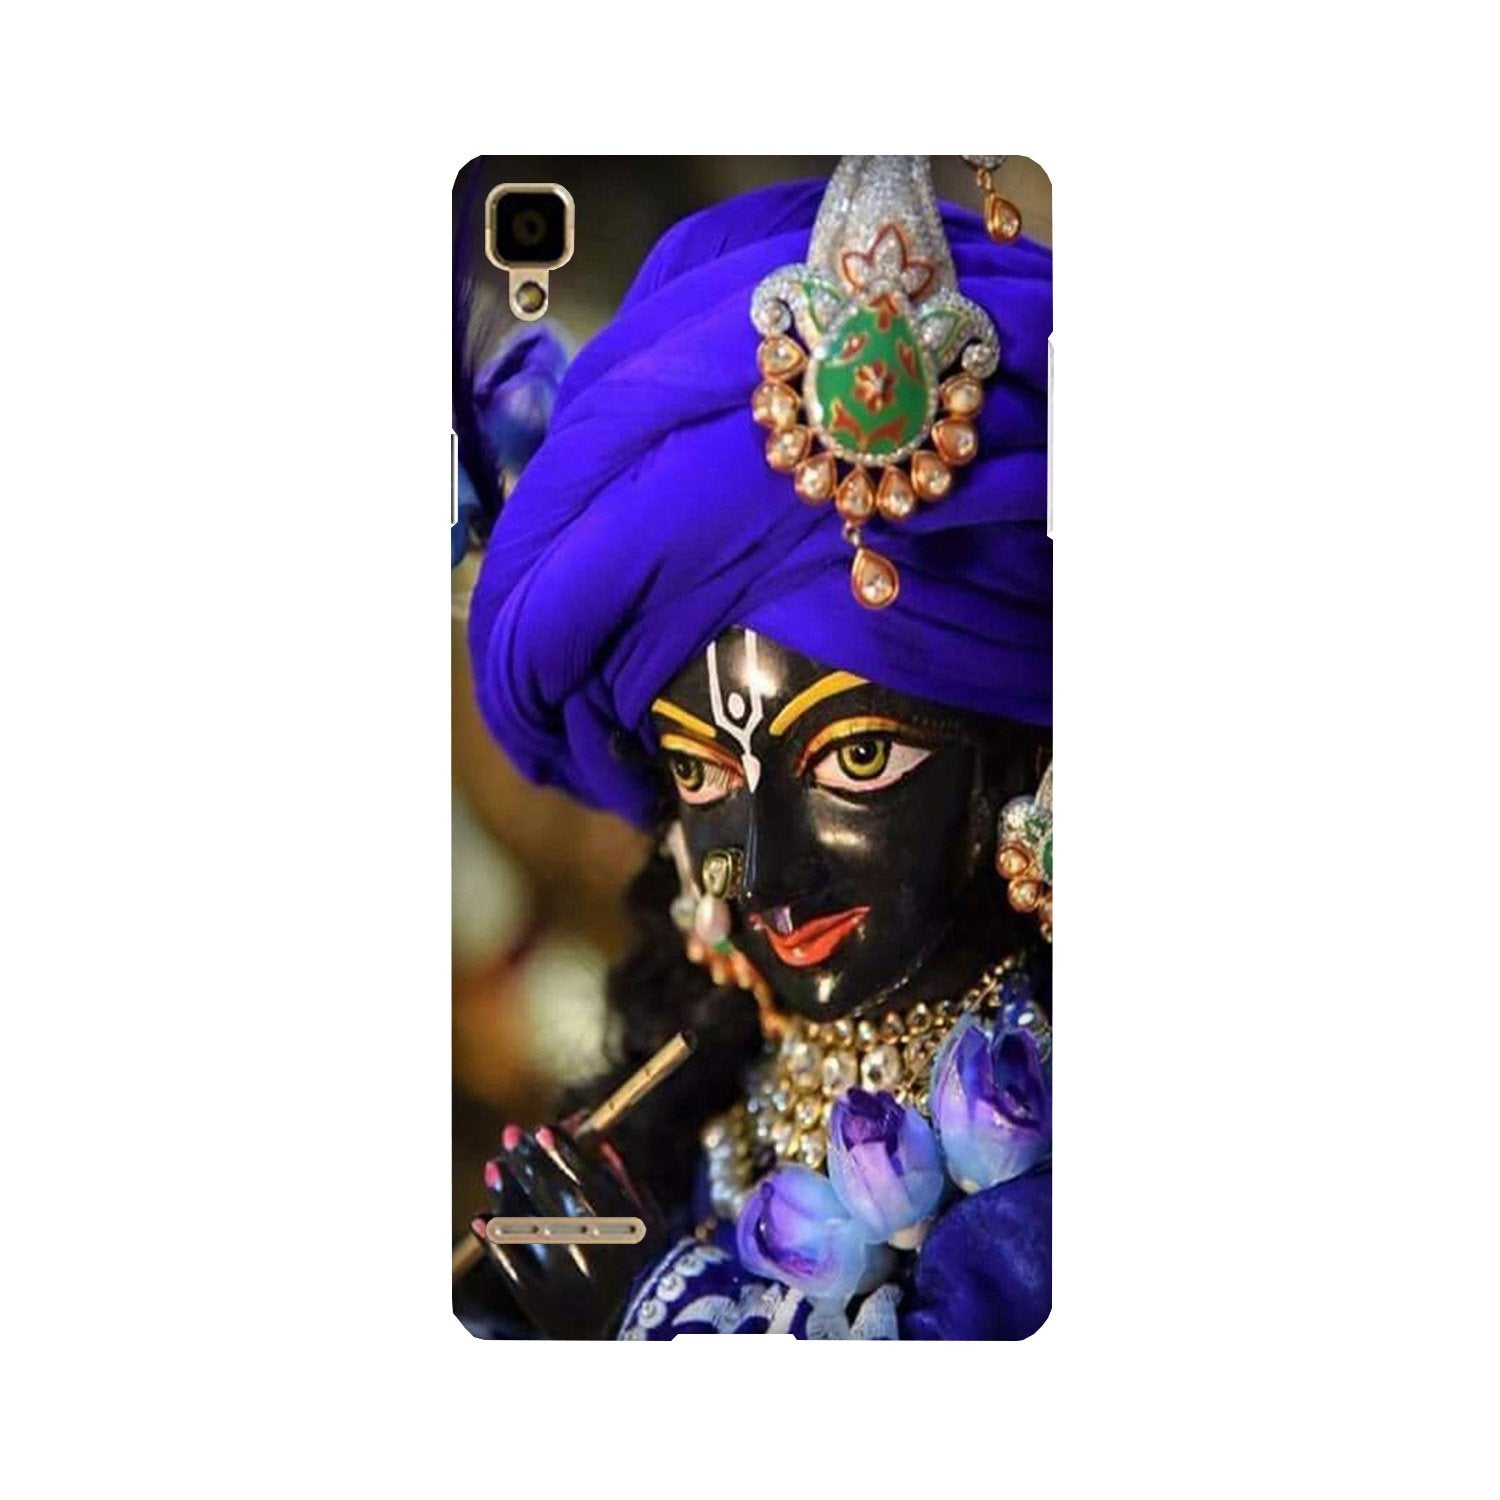 Lord Krishna4 Case for Oppo F1